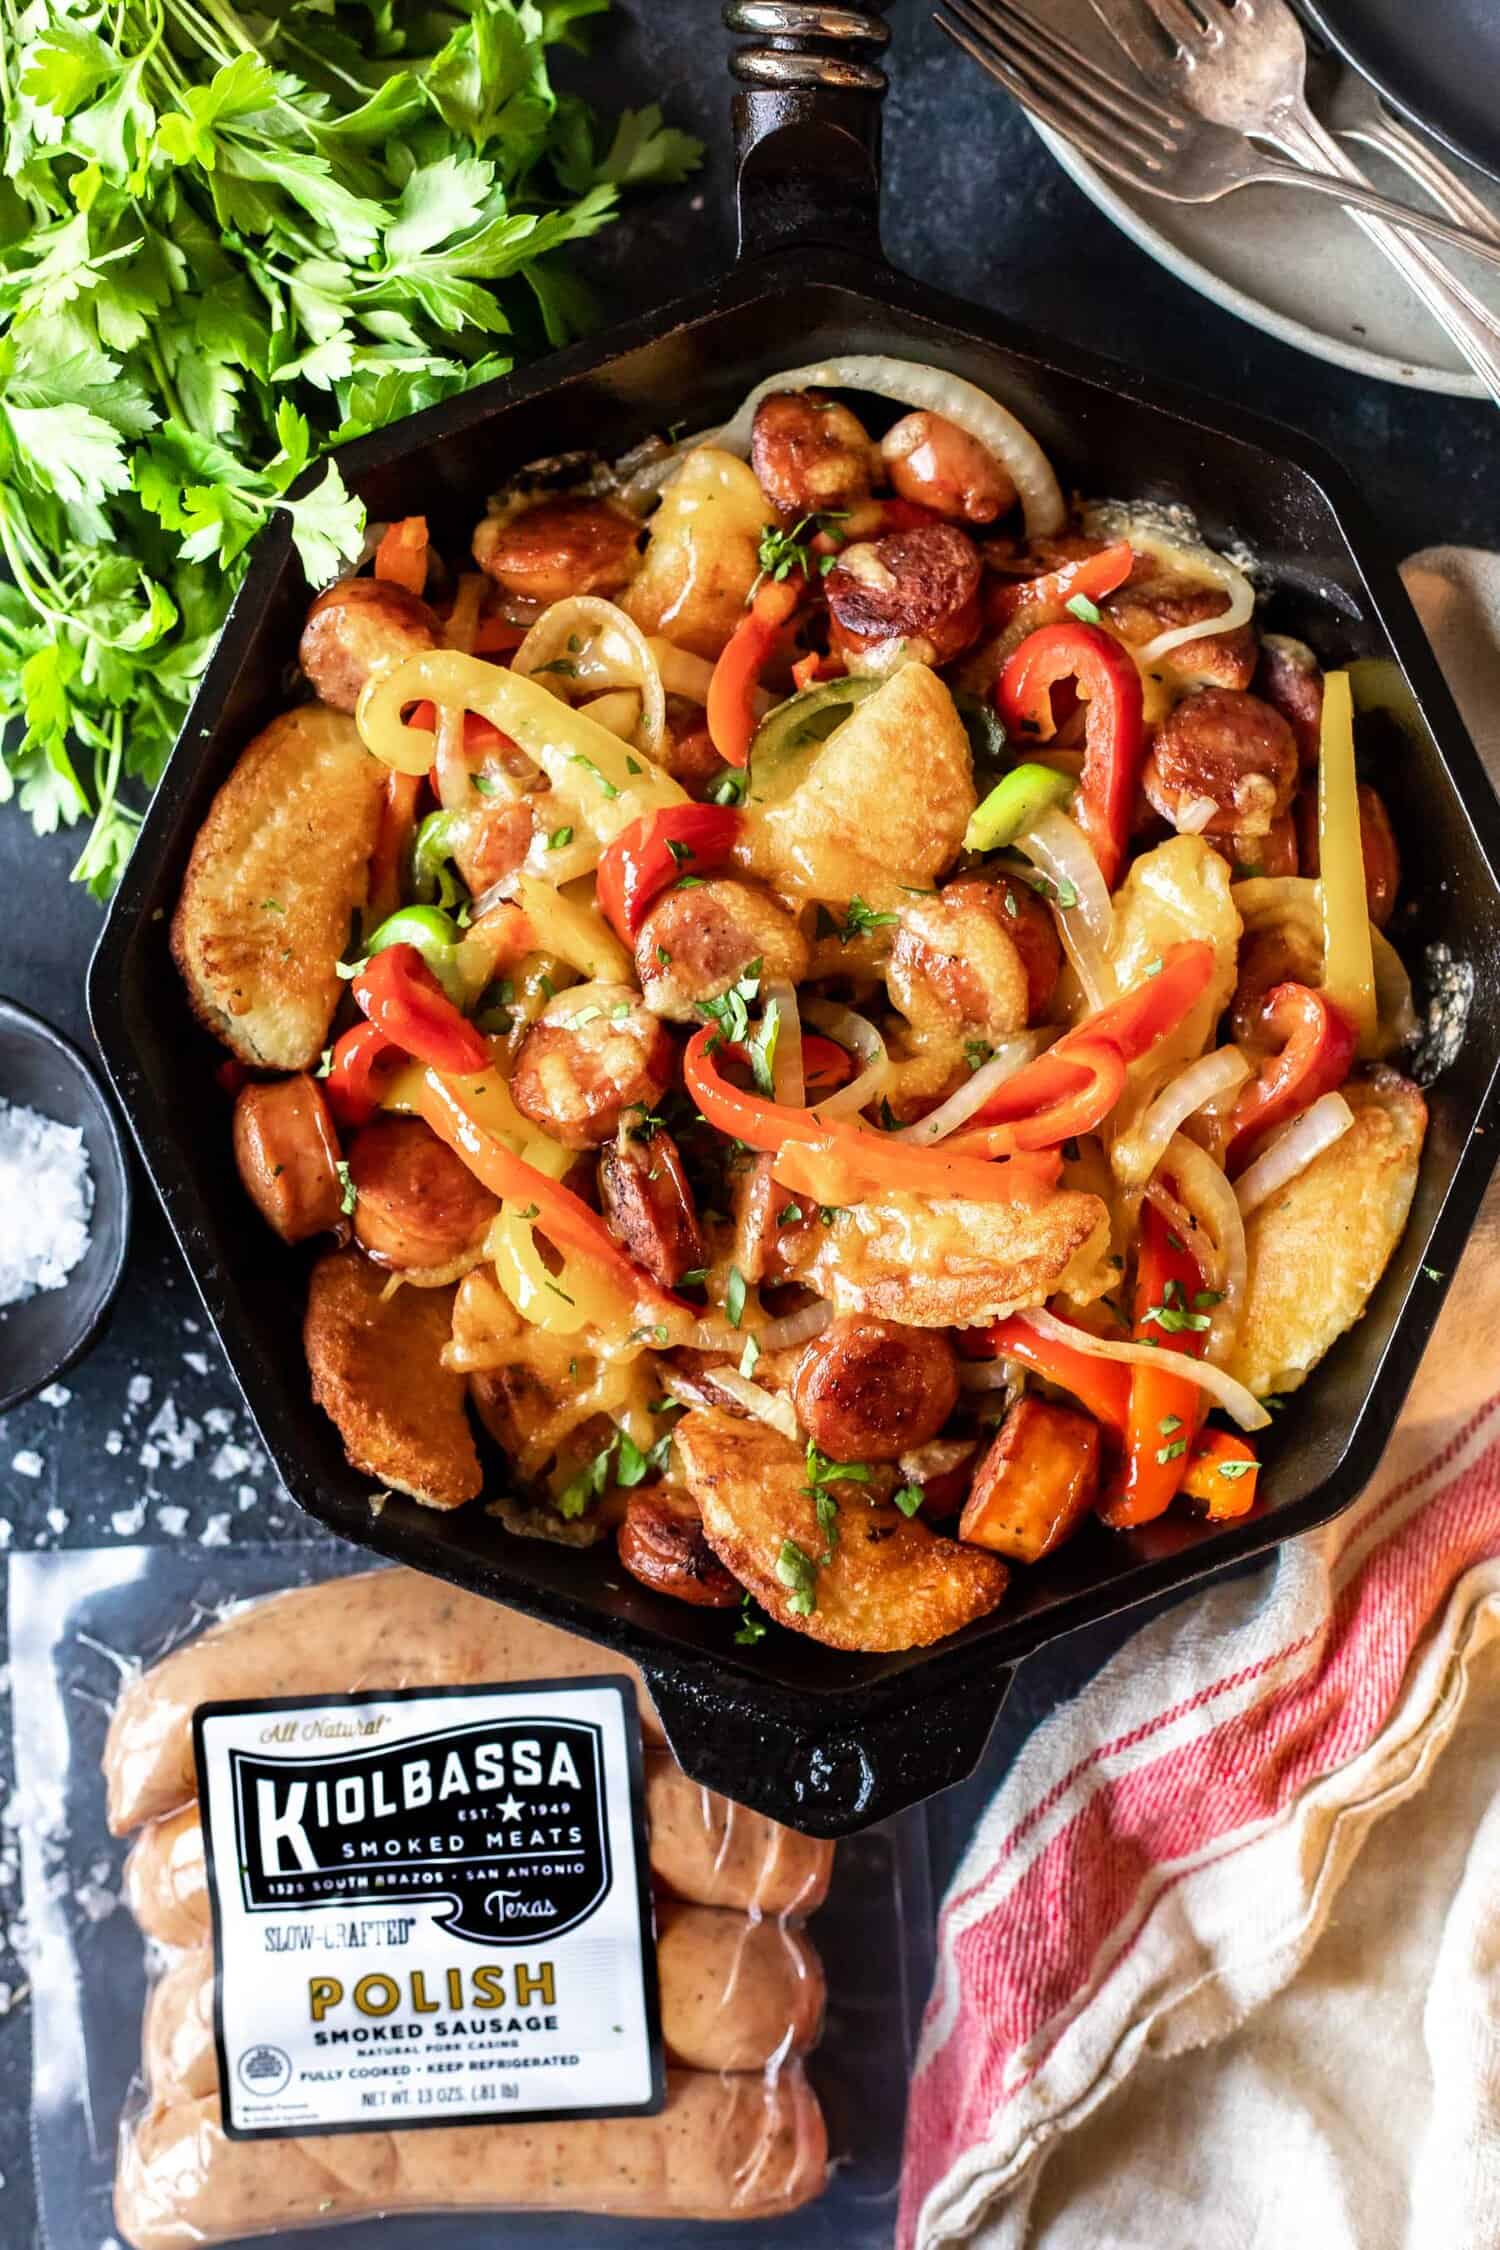 Cast Iron Skillet filled with cooked peppers, onions, rounds of sausage and keto pierogi's